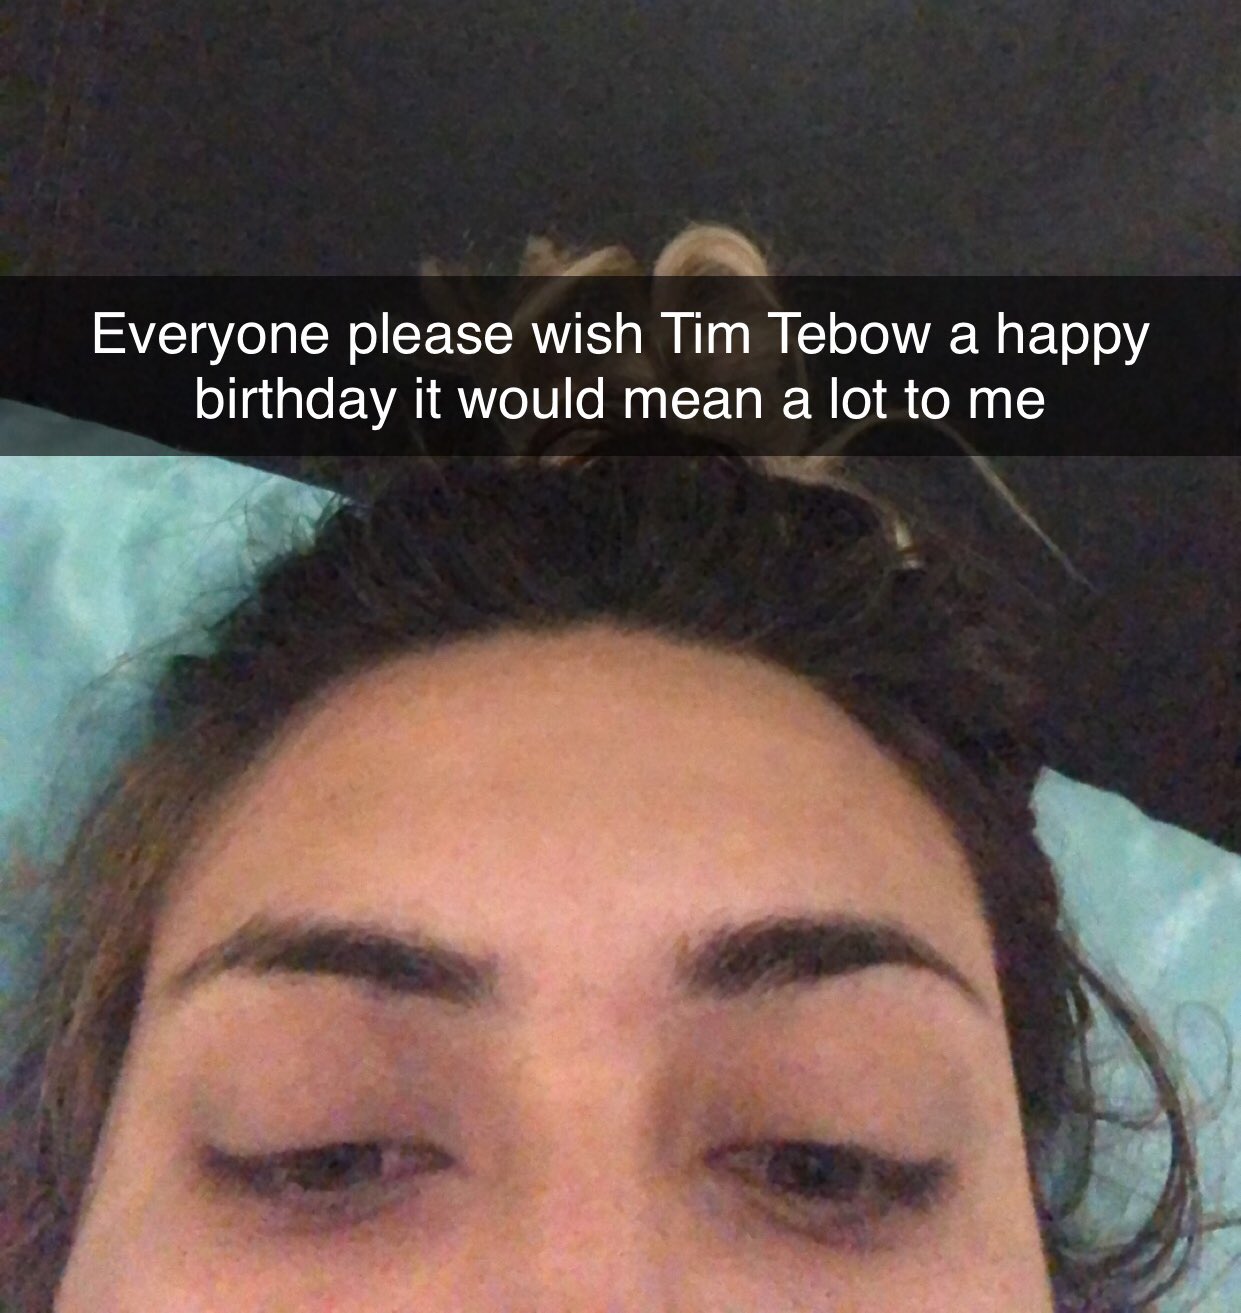 Im really sick and bedridden so please wish Tim Tebow a happy birthday it s my dying wish 